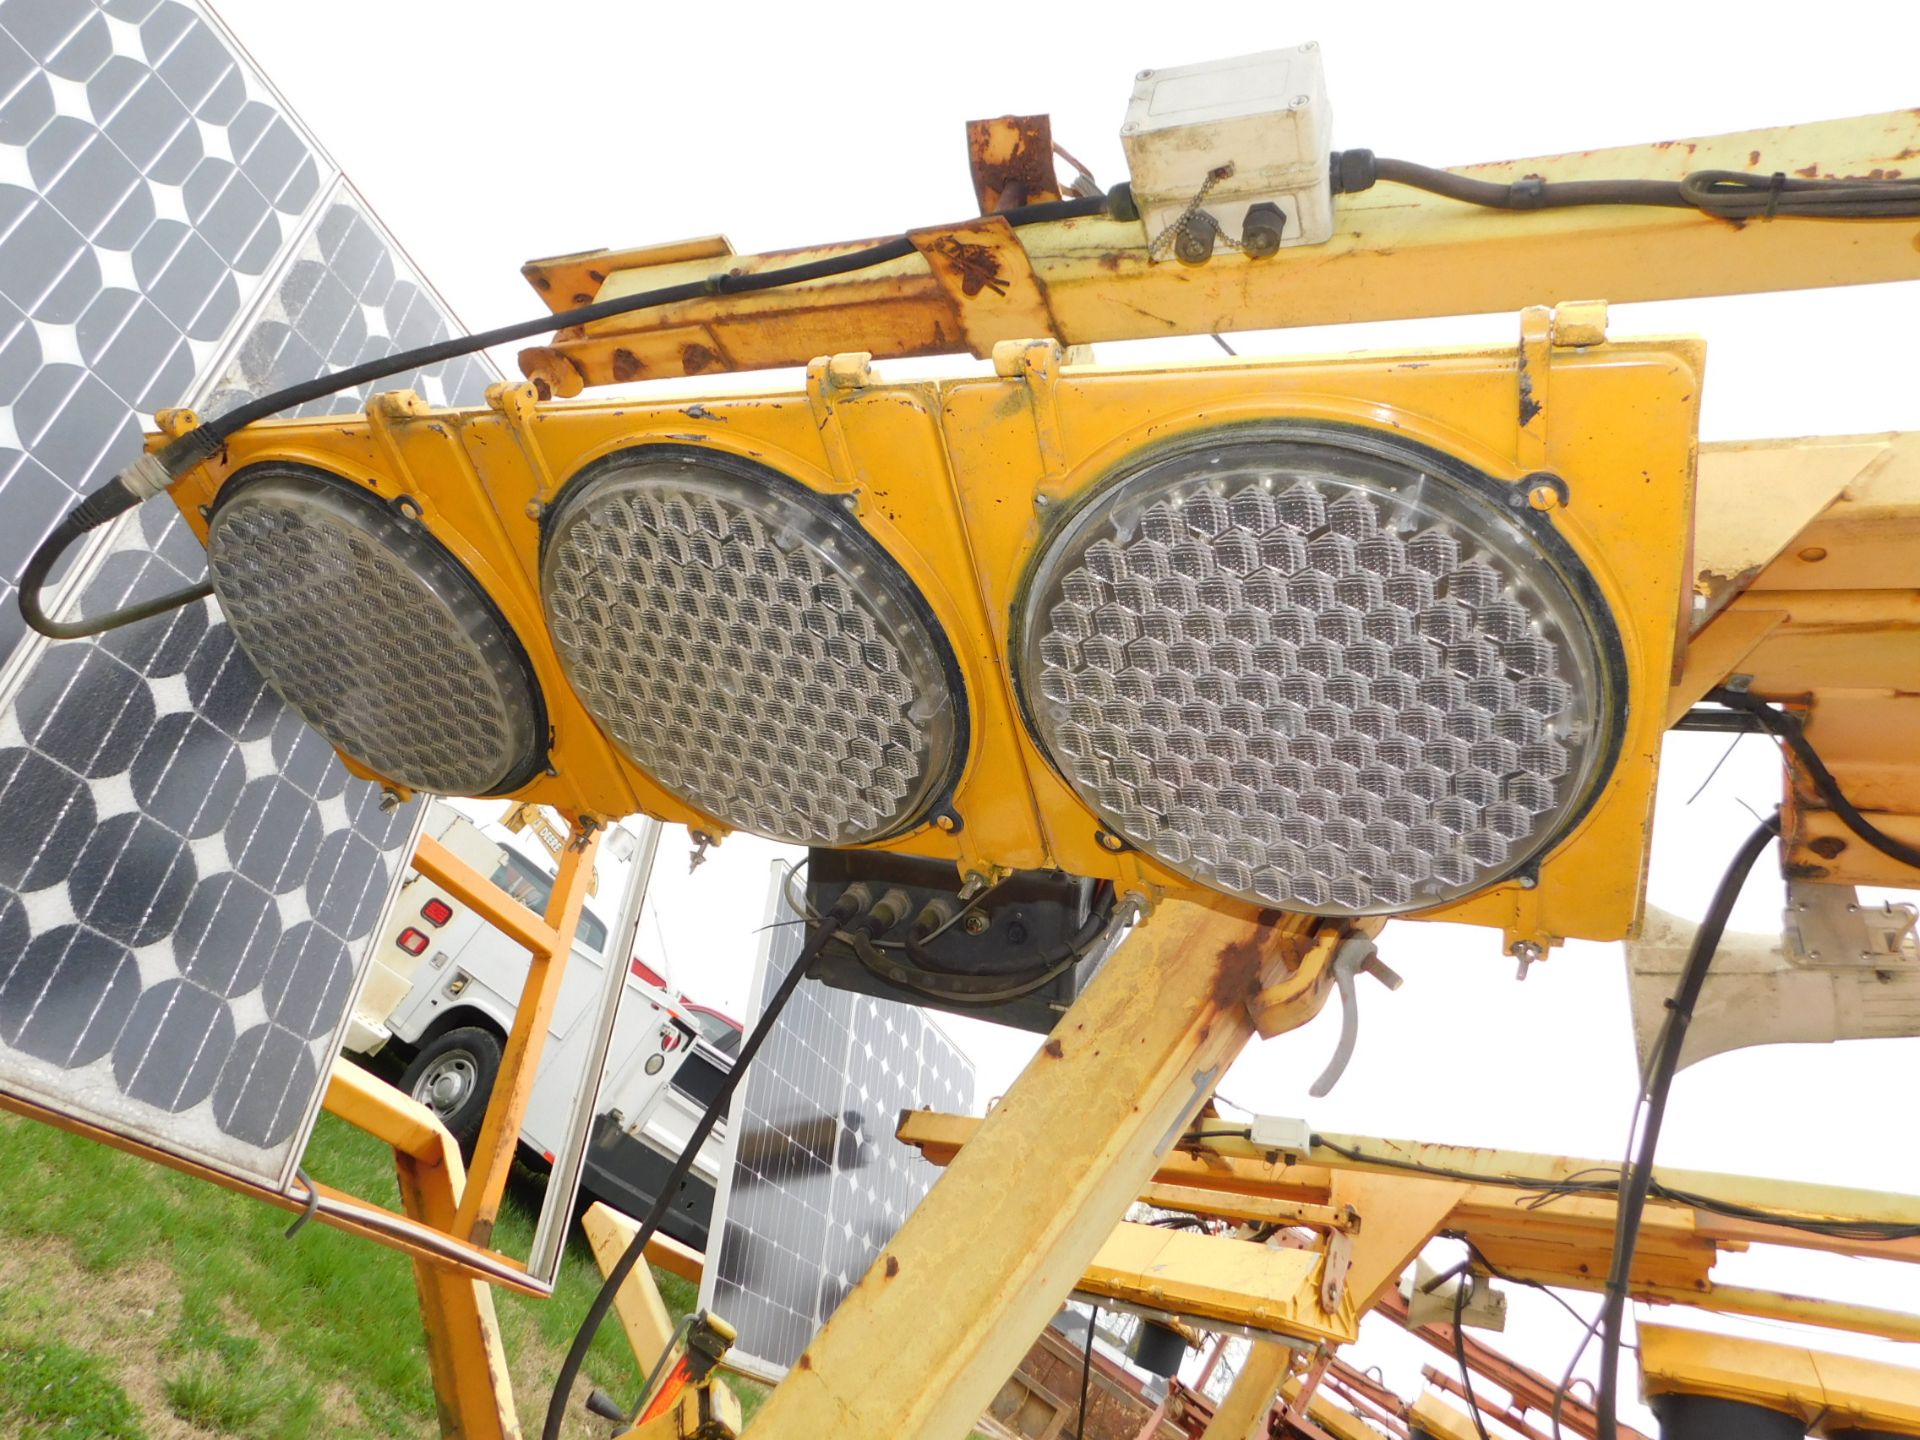 (2) Horizon Signal Tech Solar-Powered Portable Traffic Signals, SN's 1037 and 1059 - Image 5 of 8